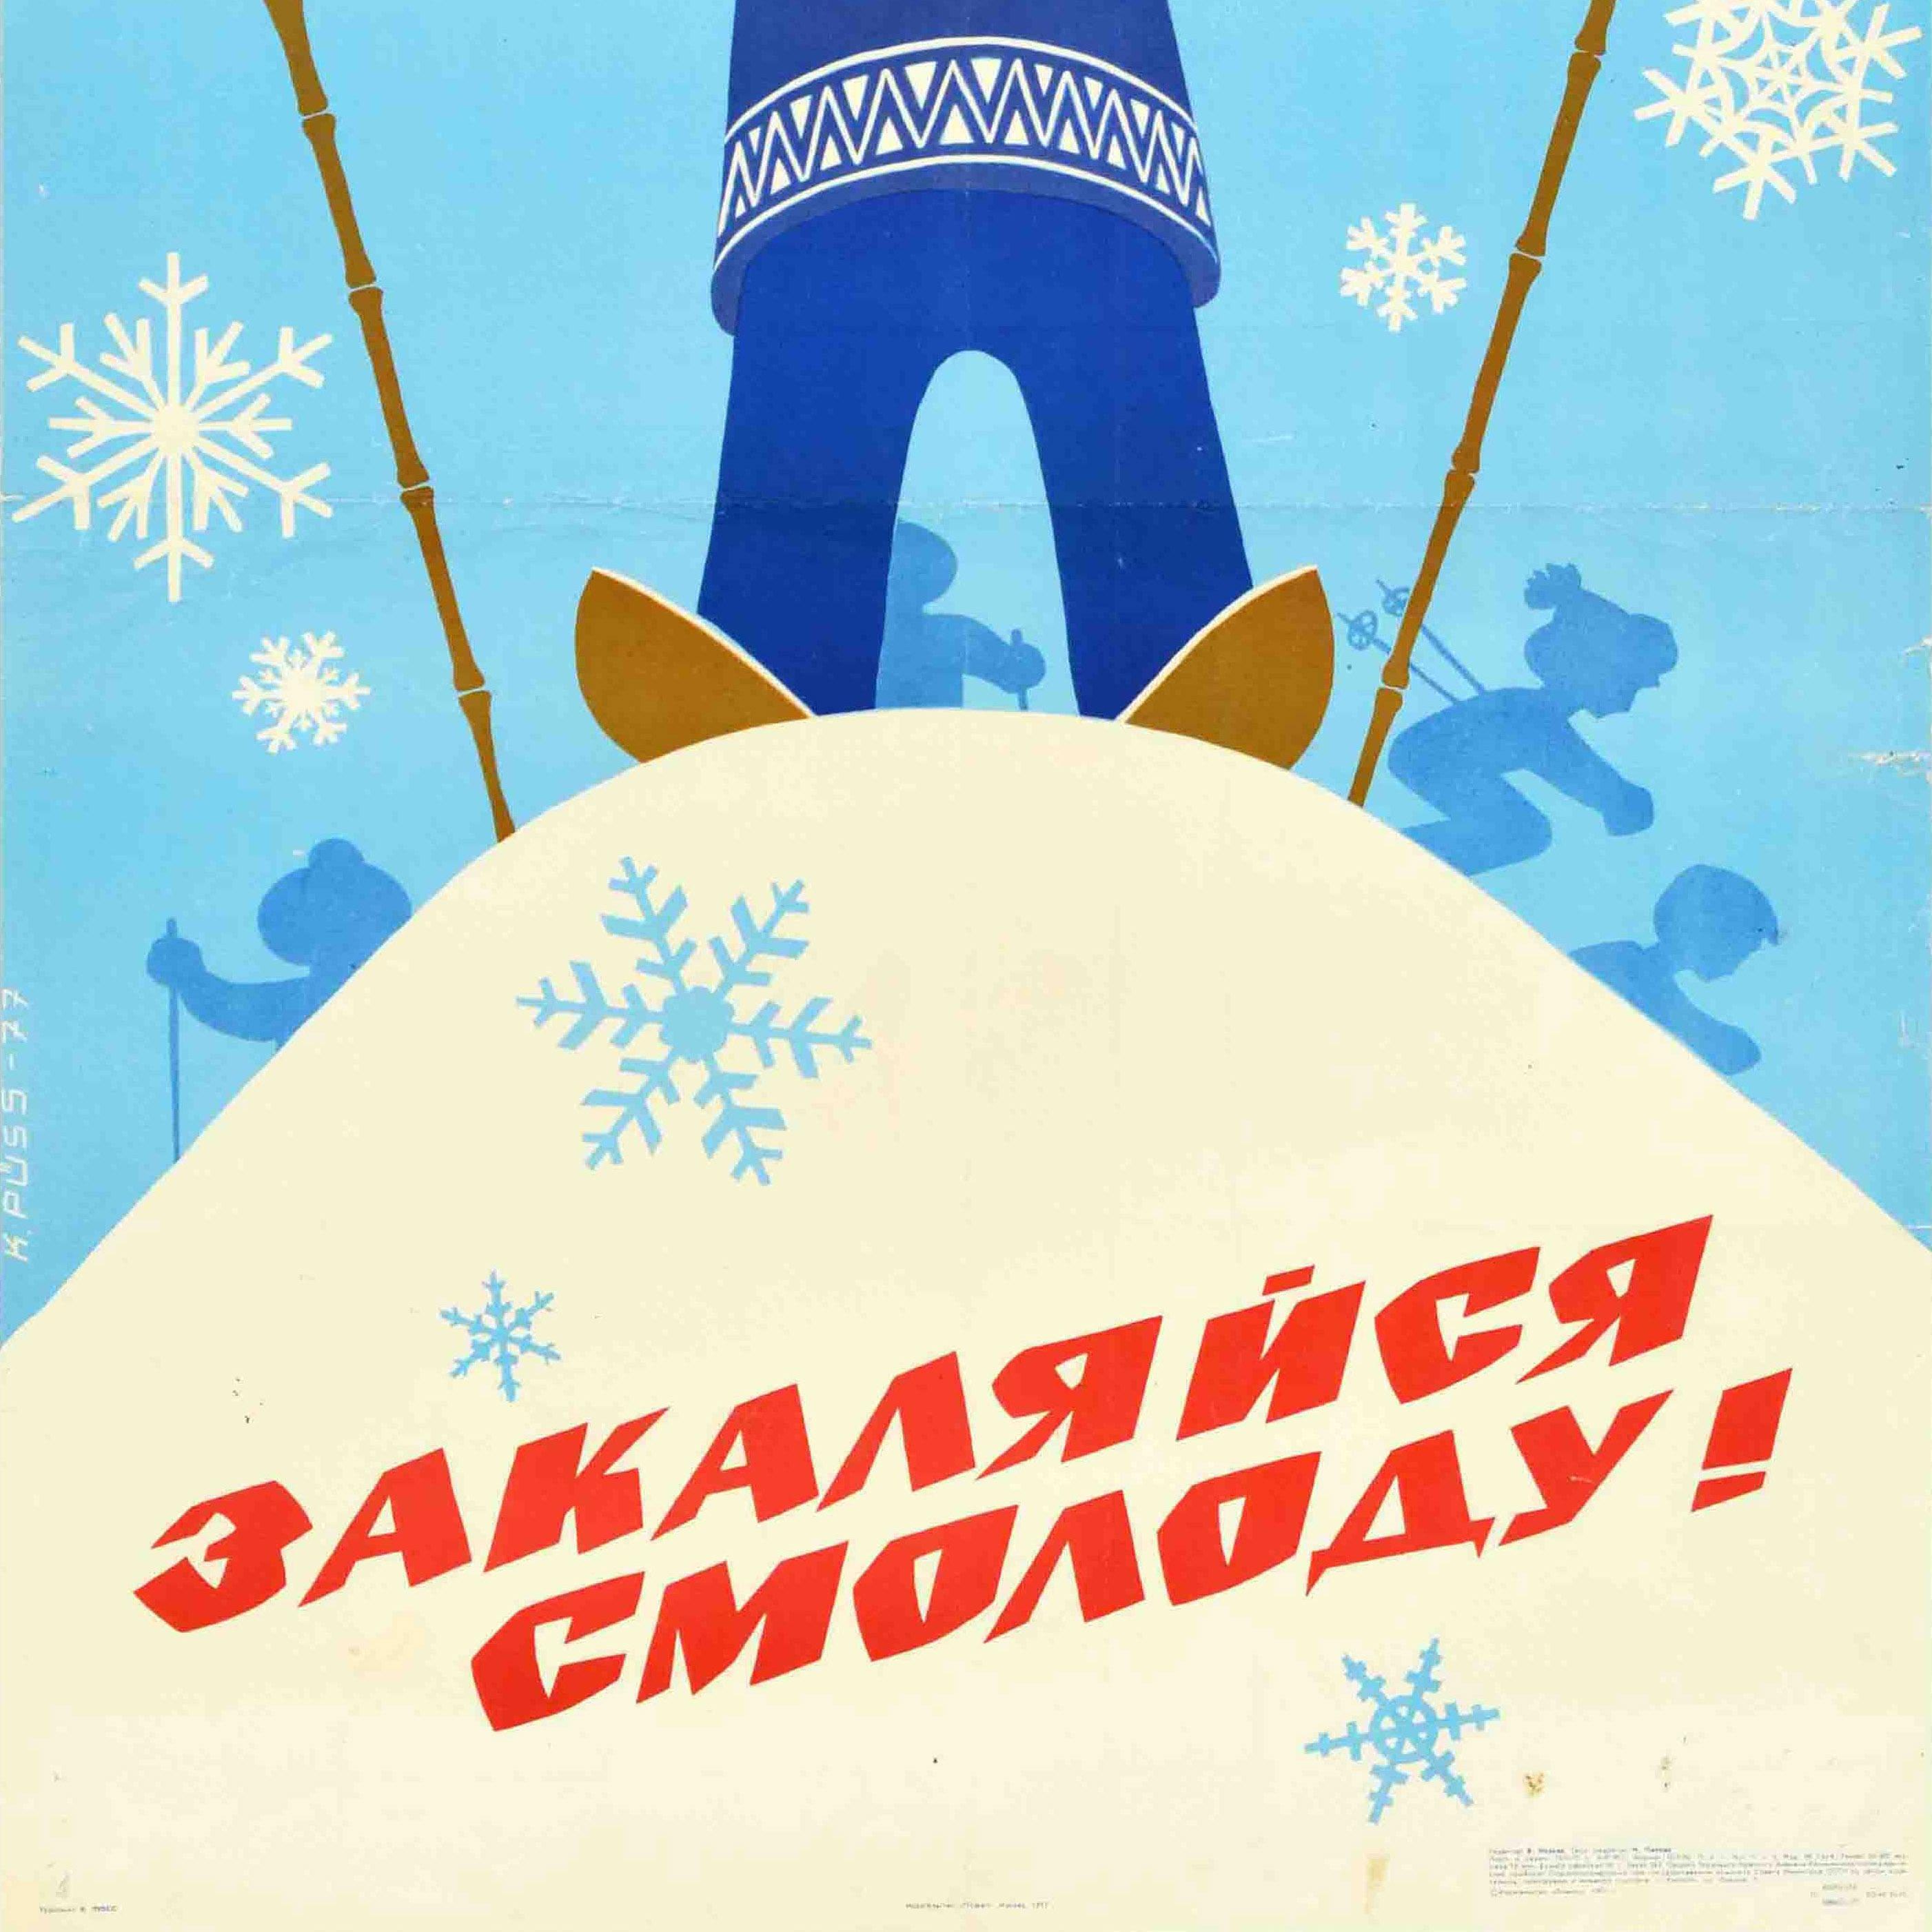 Original vintage sport health poster - Be strong and healthy from a young age! / Закаляйся смолоду! Great image featuring a young smiling child with rosy cheeks standing on skis on a snowy hill and holding wooden ski poles in outstretched arms with